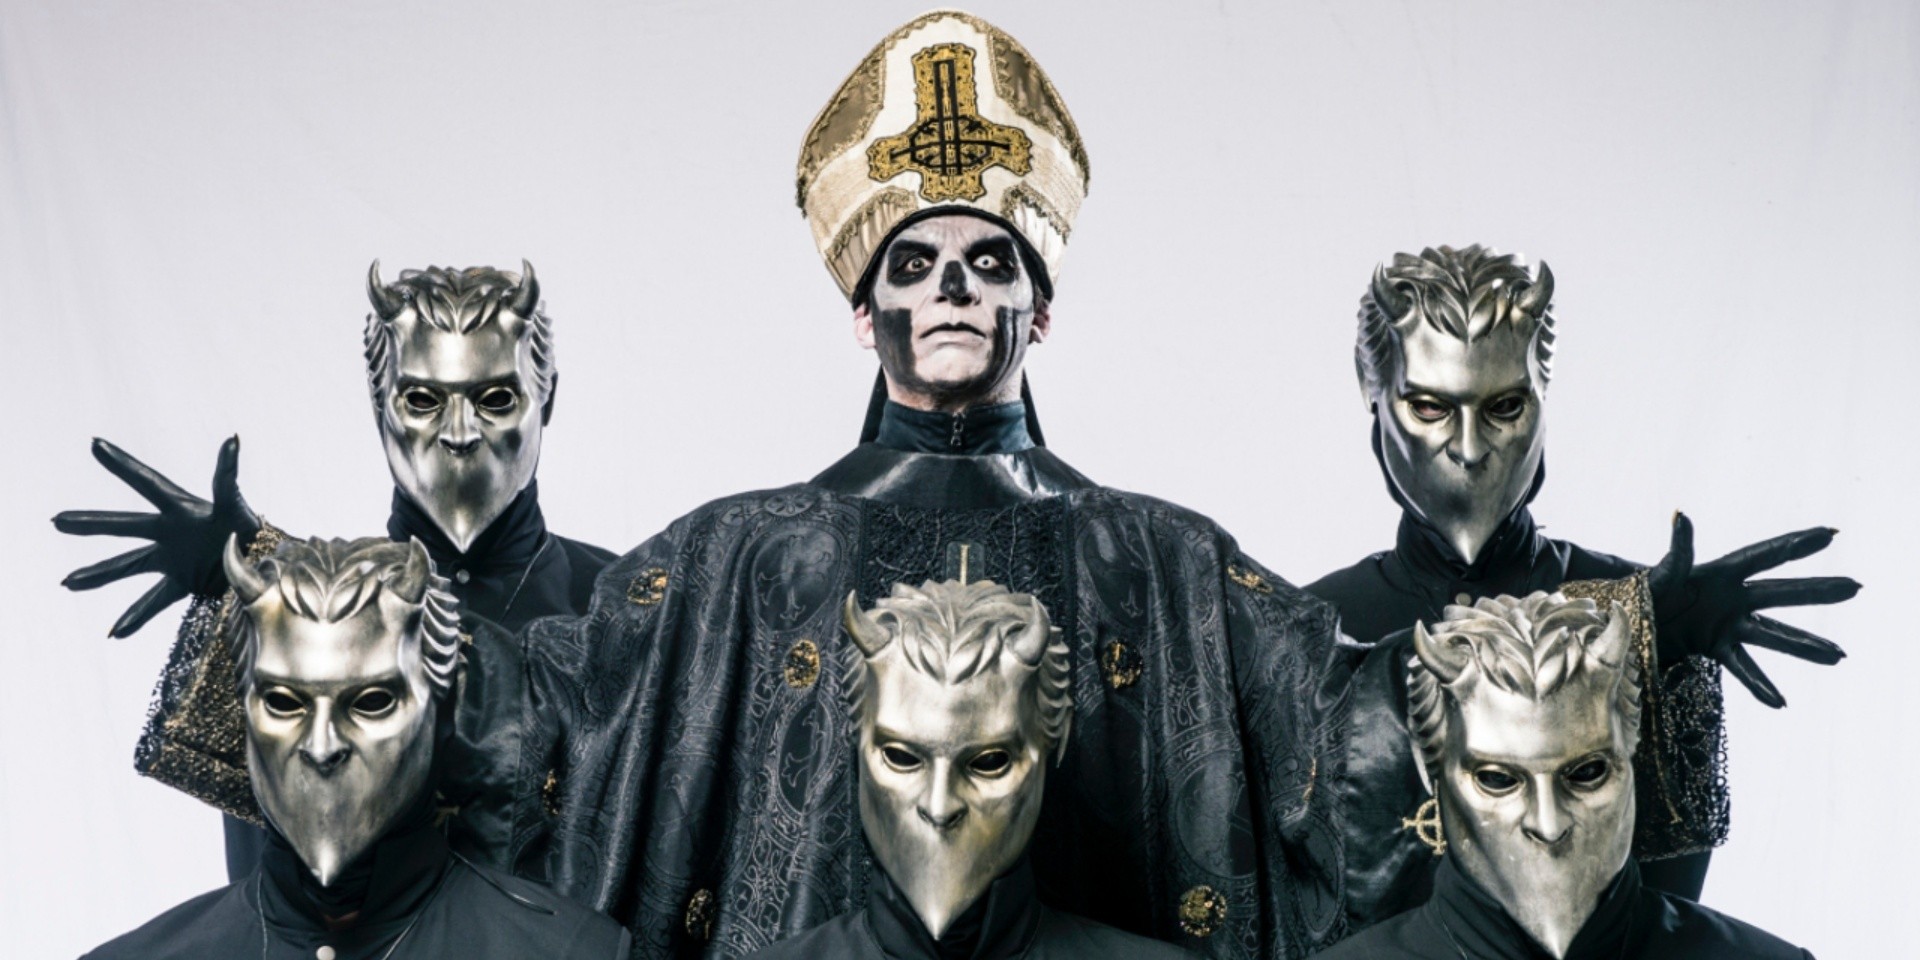 Ghost to release "darker and heavier" new album and possibly a full-length feature film